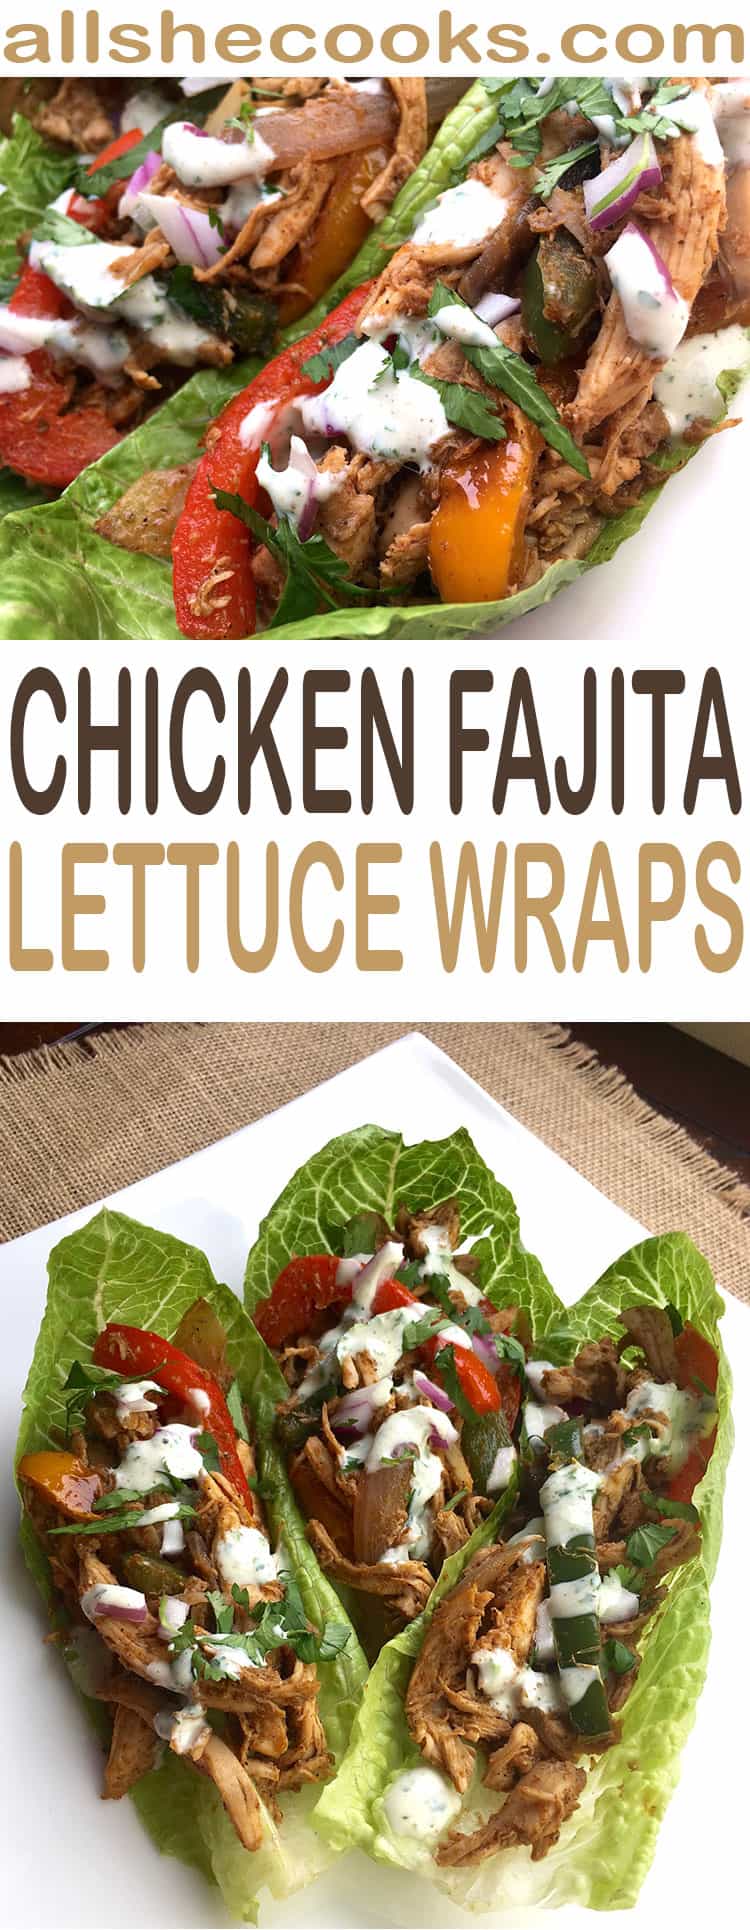 These easy Chicken Fajita Lettuce Wraps are a great dinner idea for a lighter meal. The sauce is so delicious and you'll find yourself wanting to make this meal again and again.